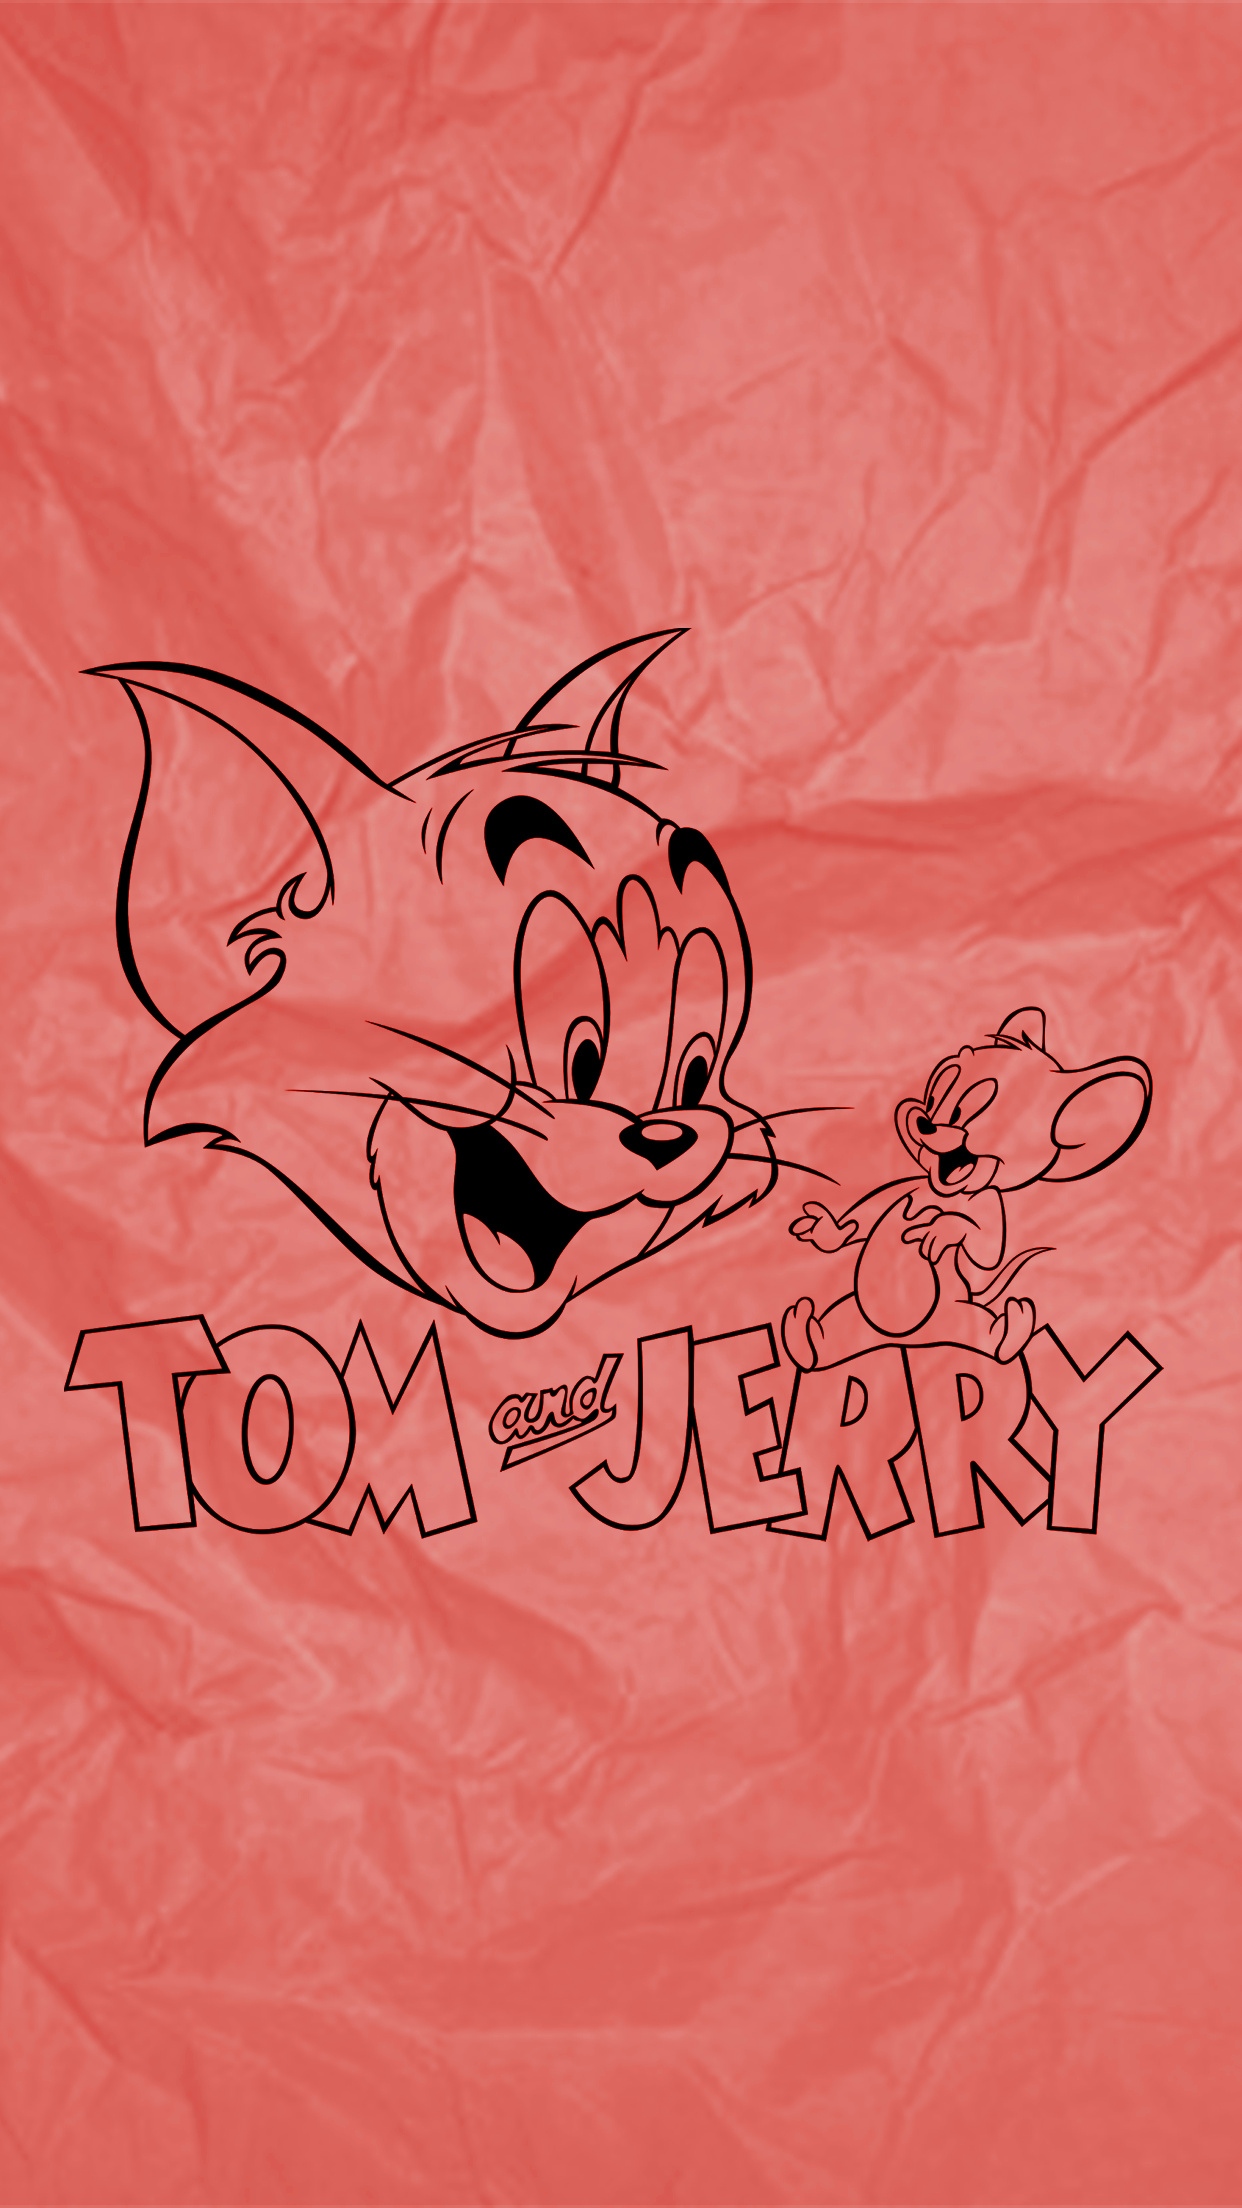 Tom And Jerry Photo.sketch.tom.jerry